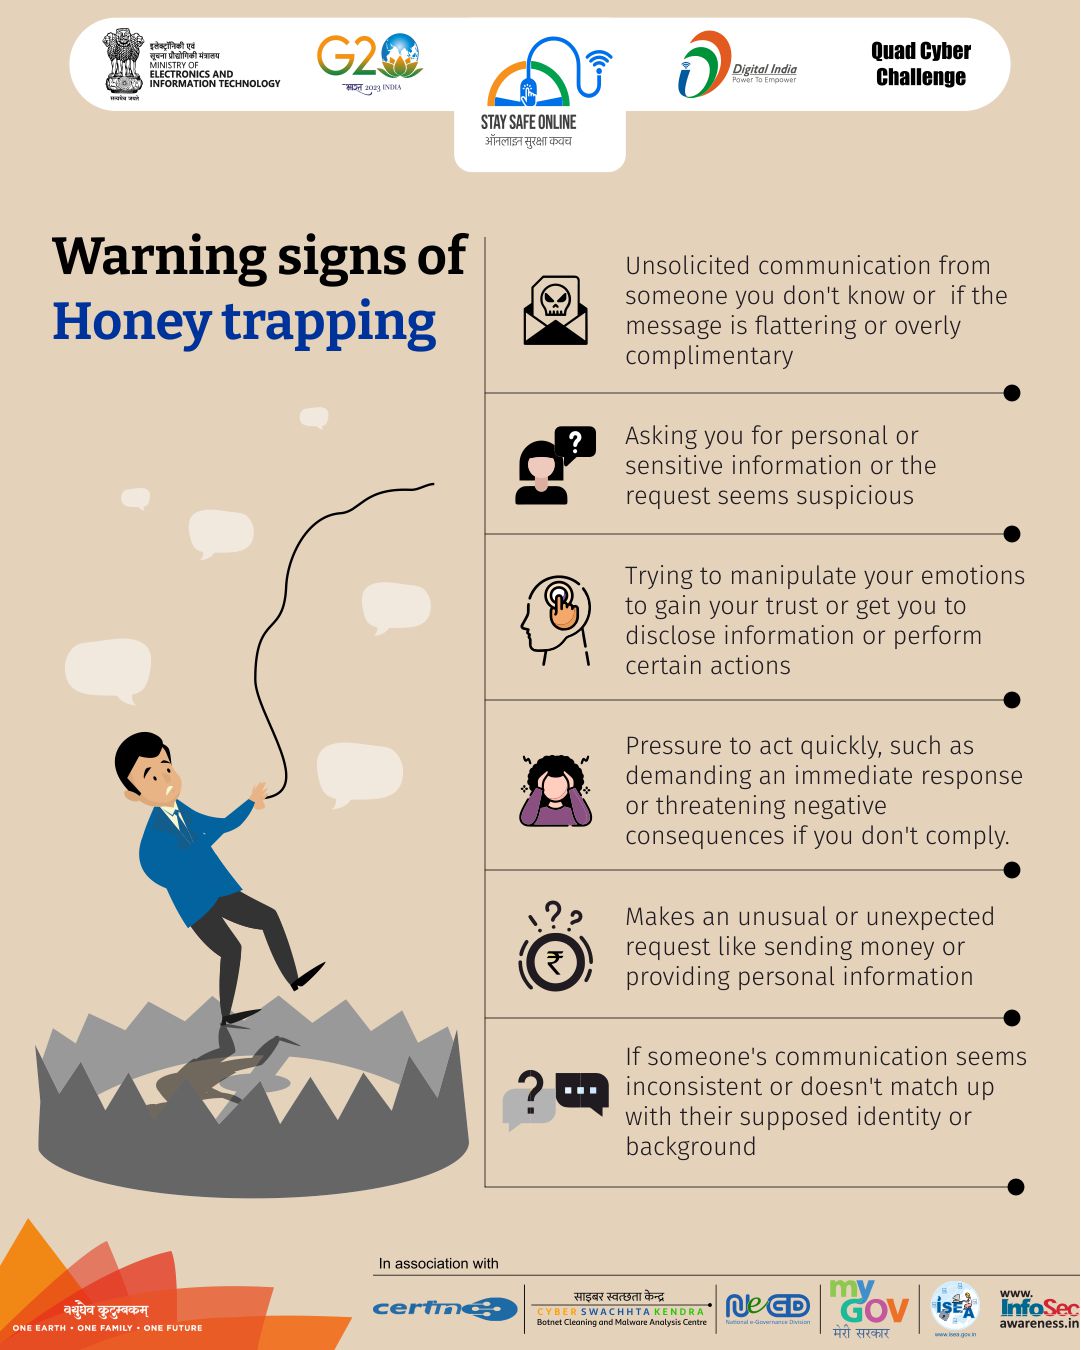 Cyber Offences - Honeytrap